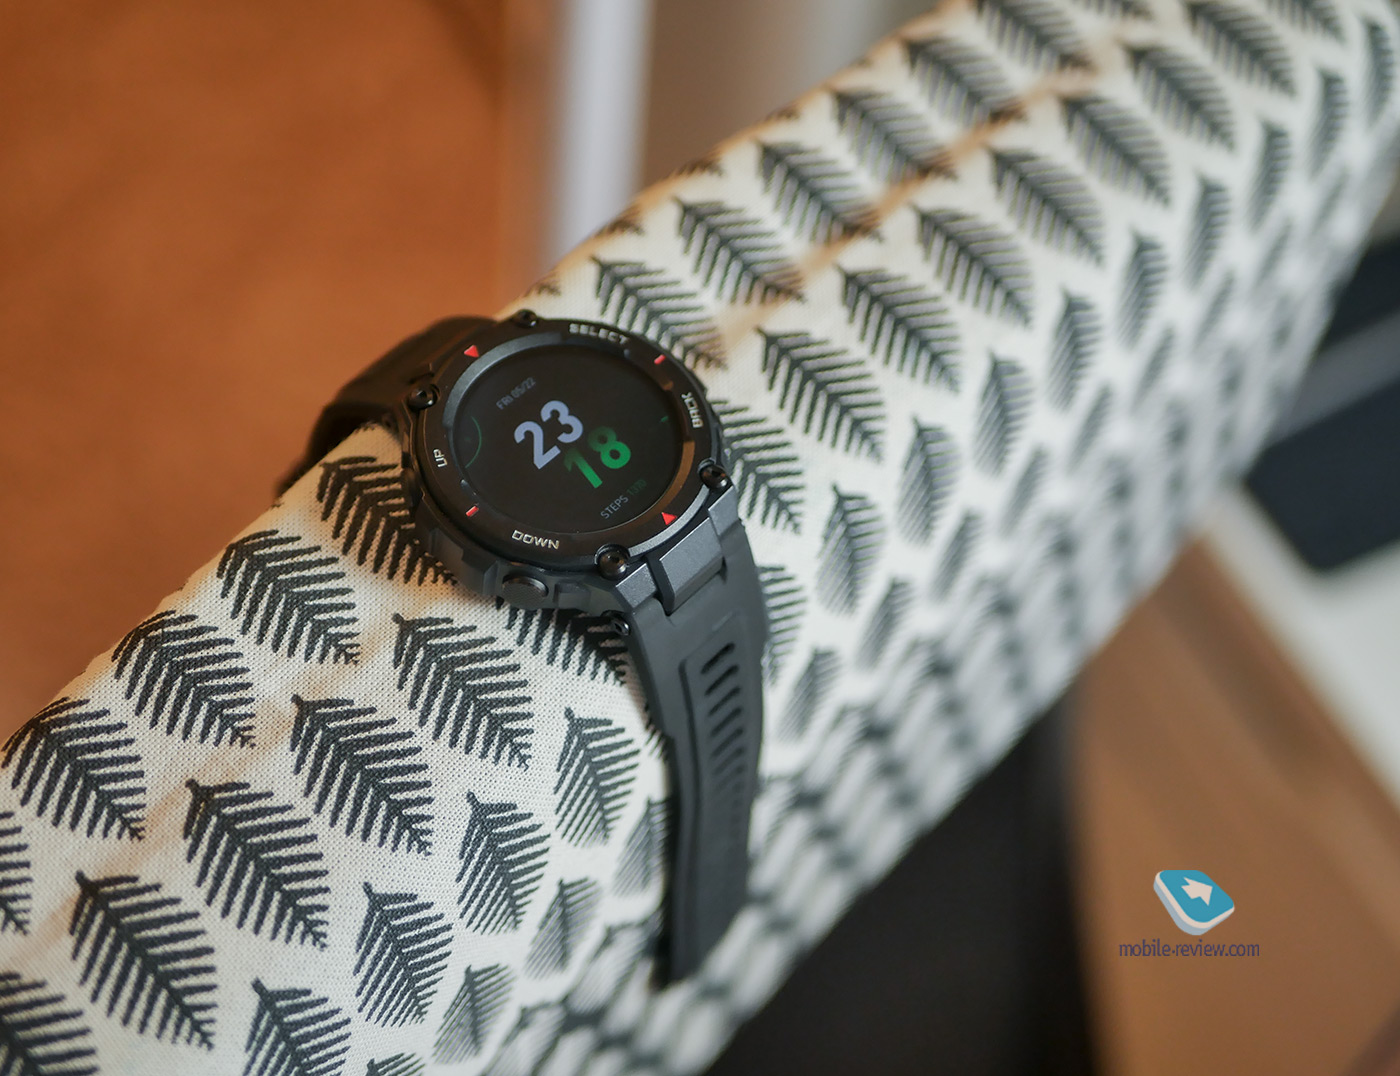 Review of the fitness watch Amazfit T-Rex